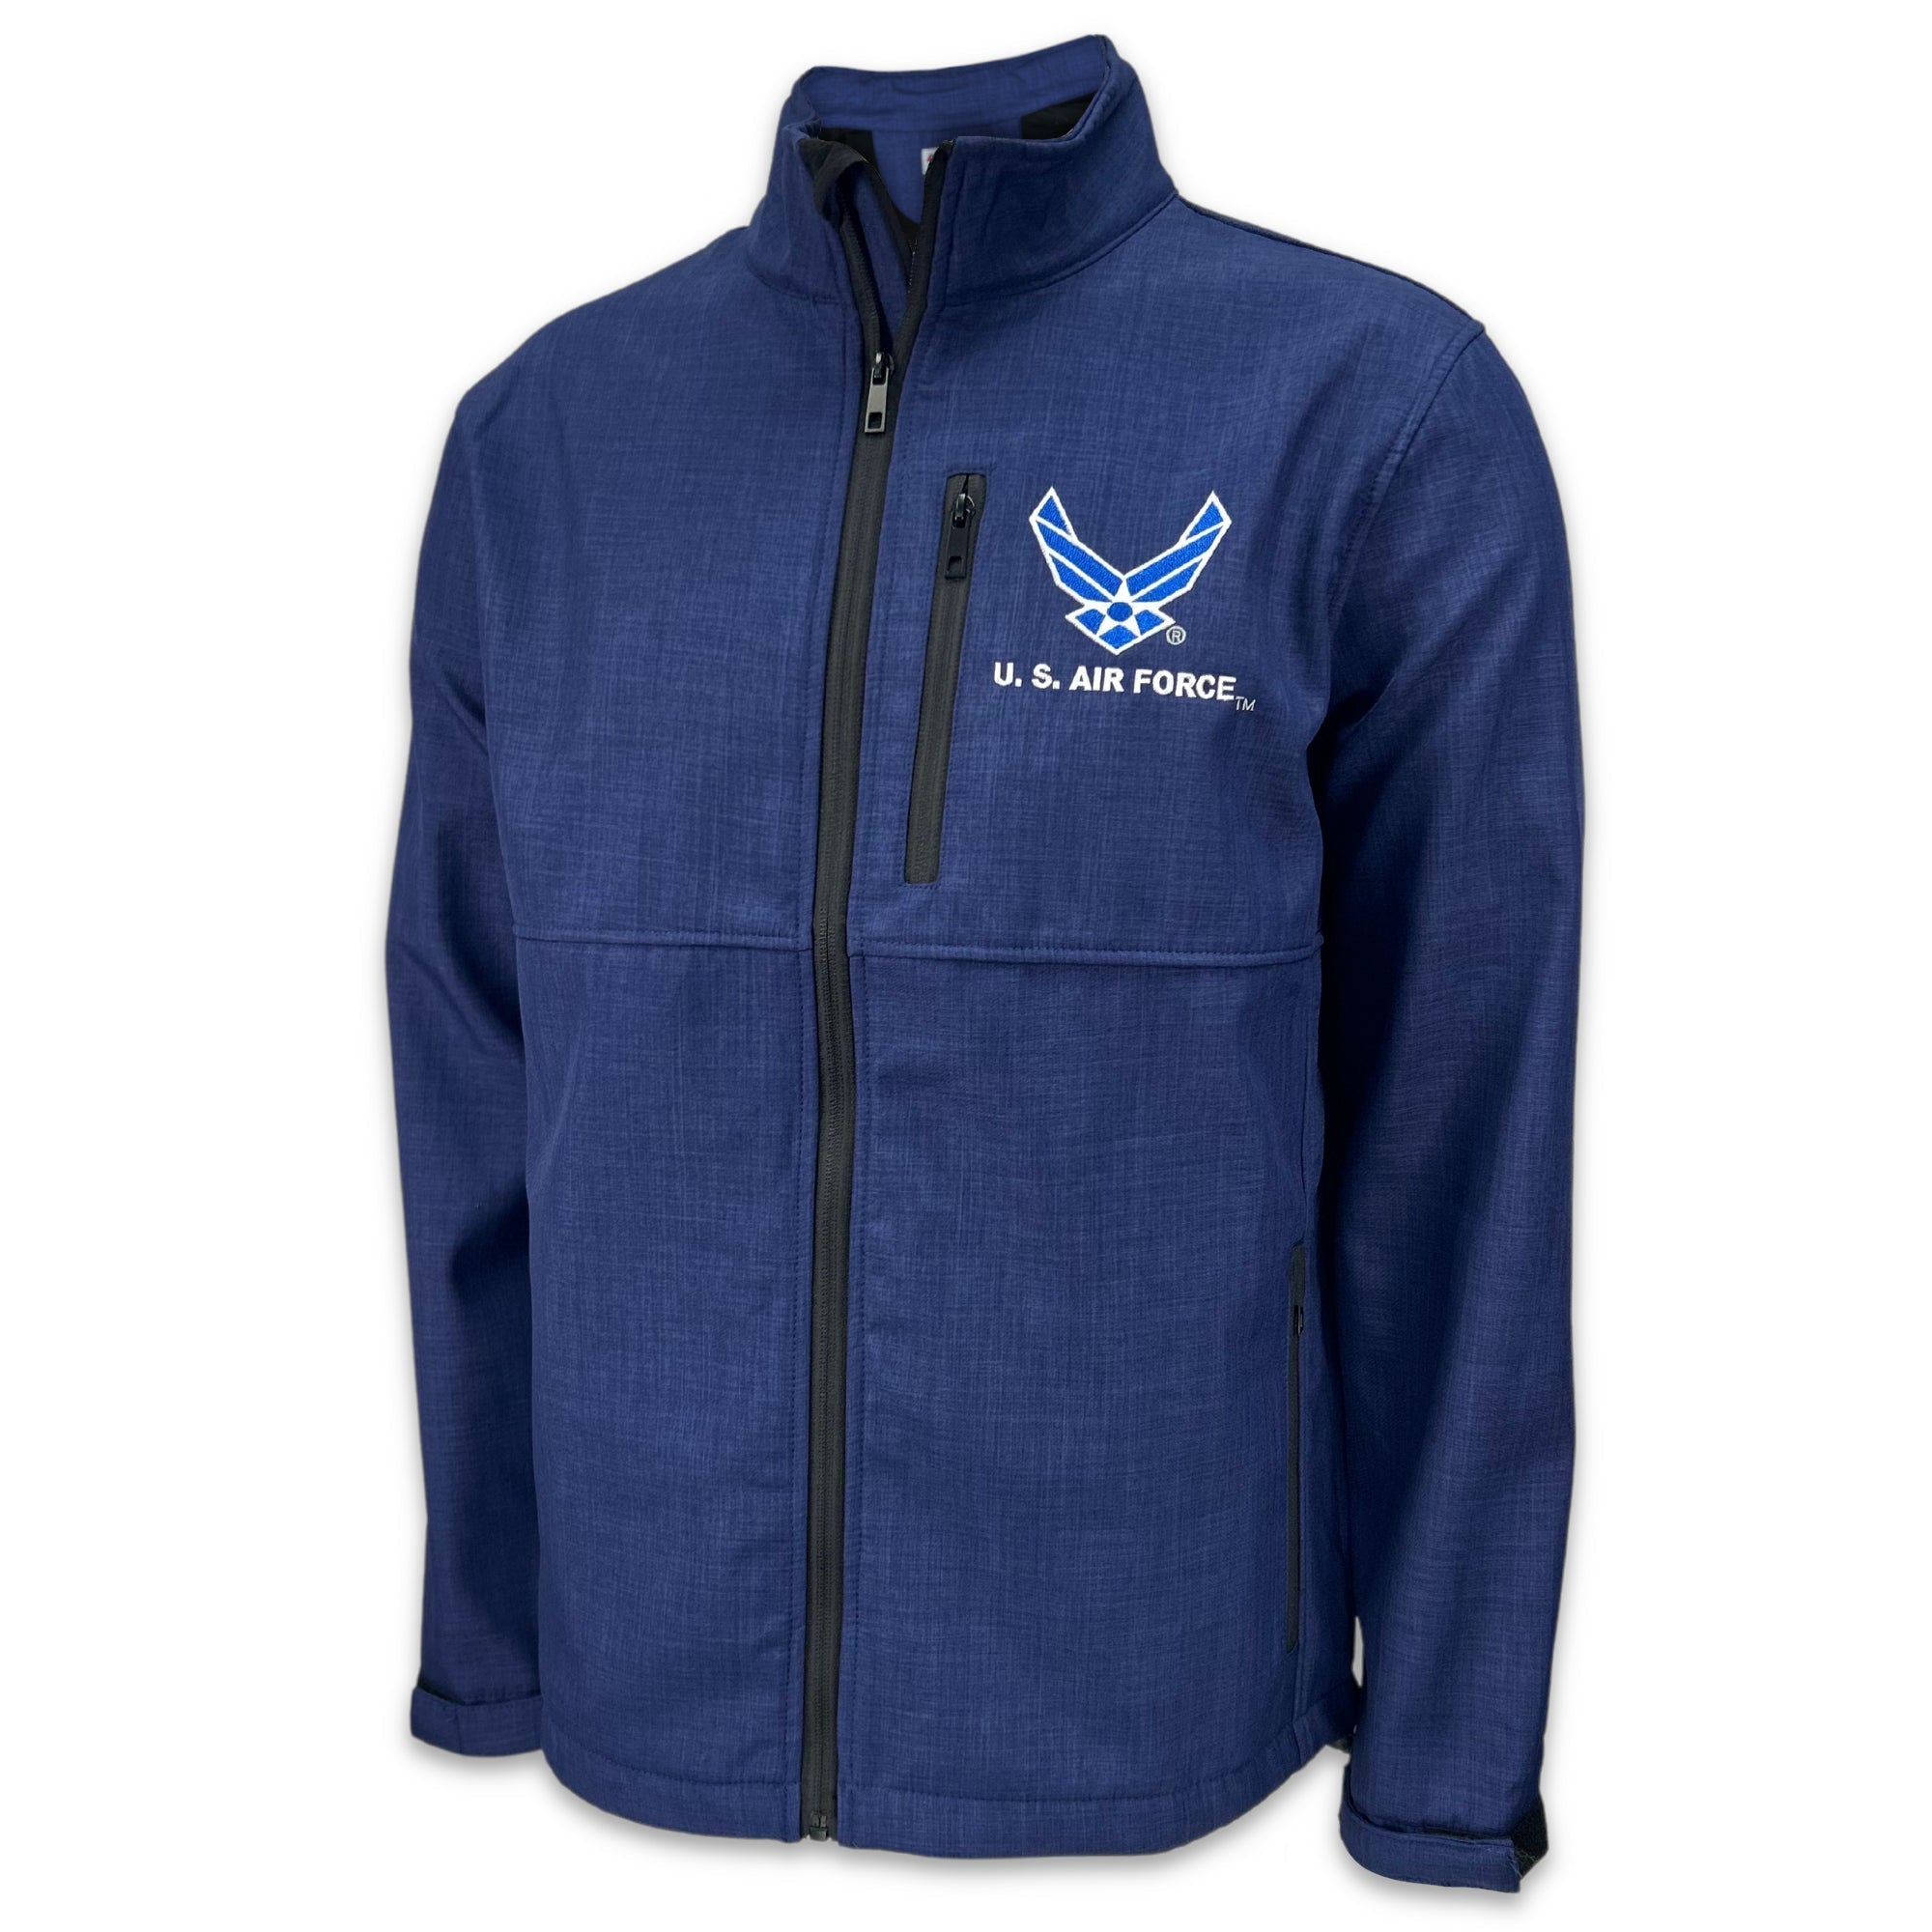 Air Force Wings Adult Softshell Jacket (Navy)